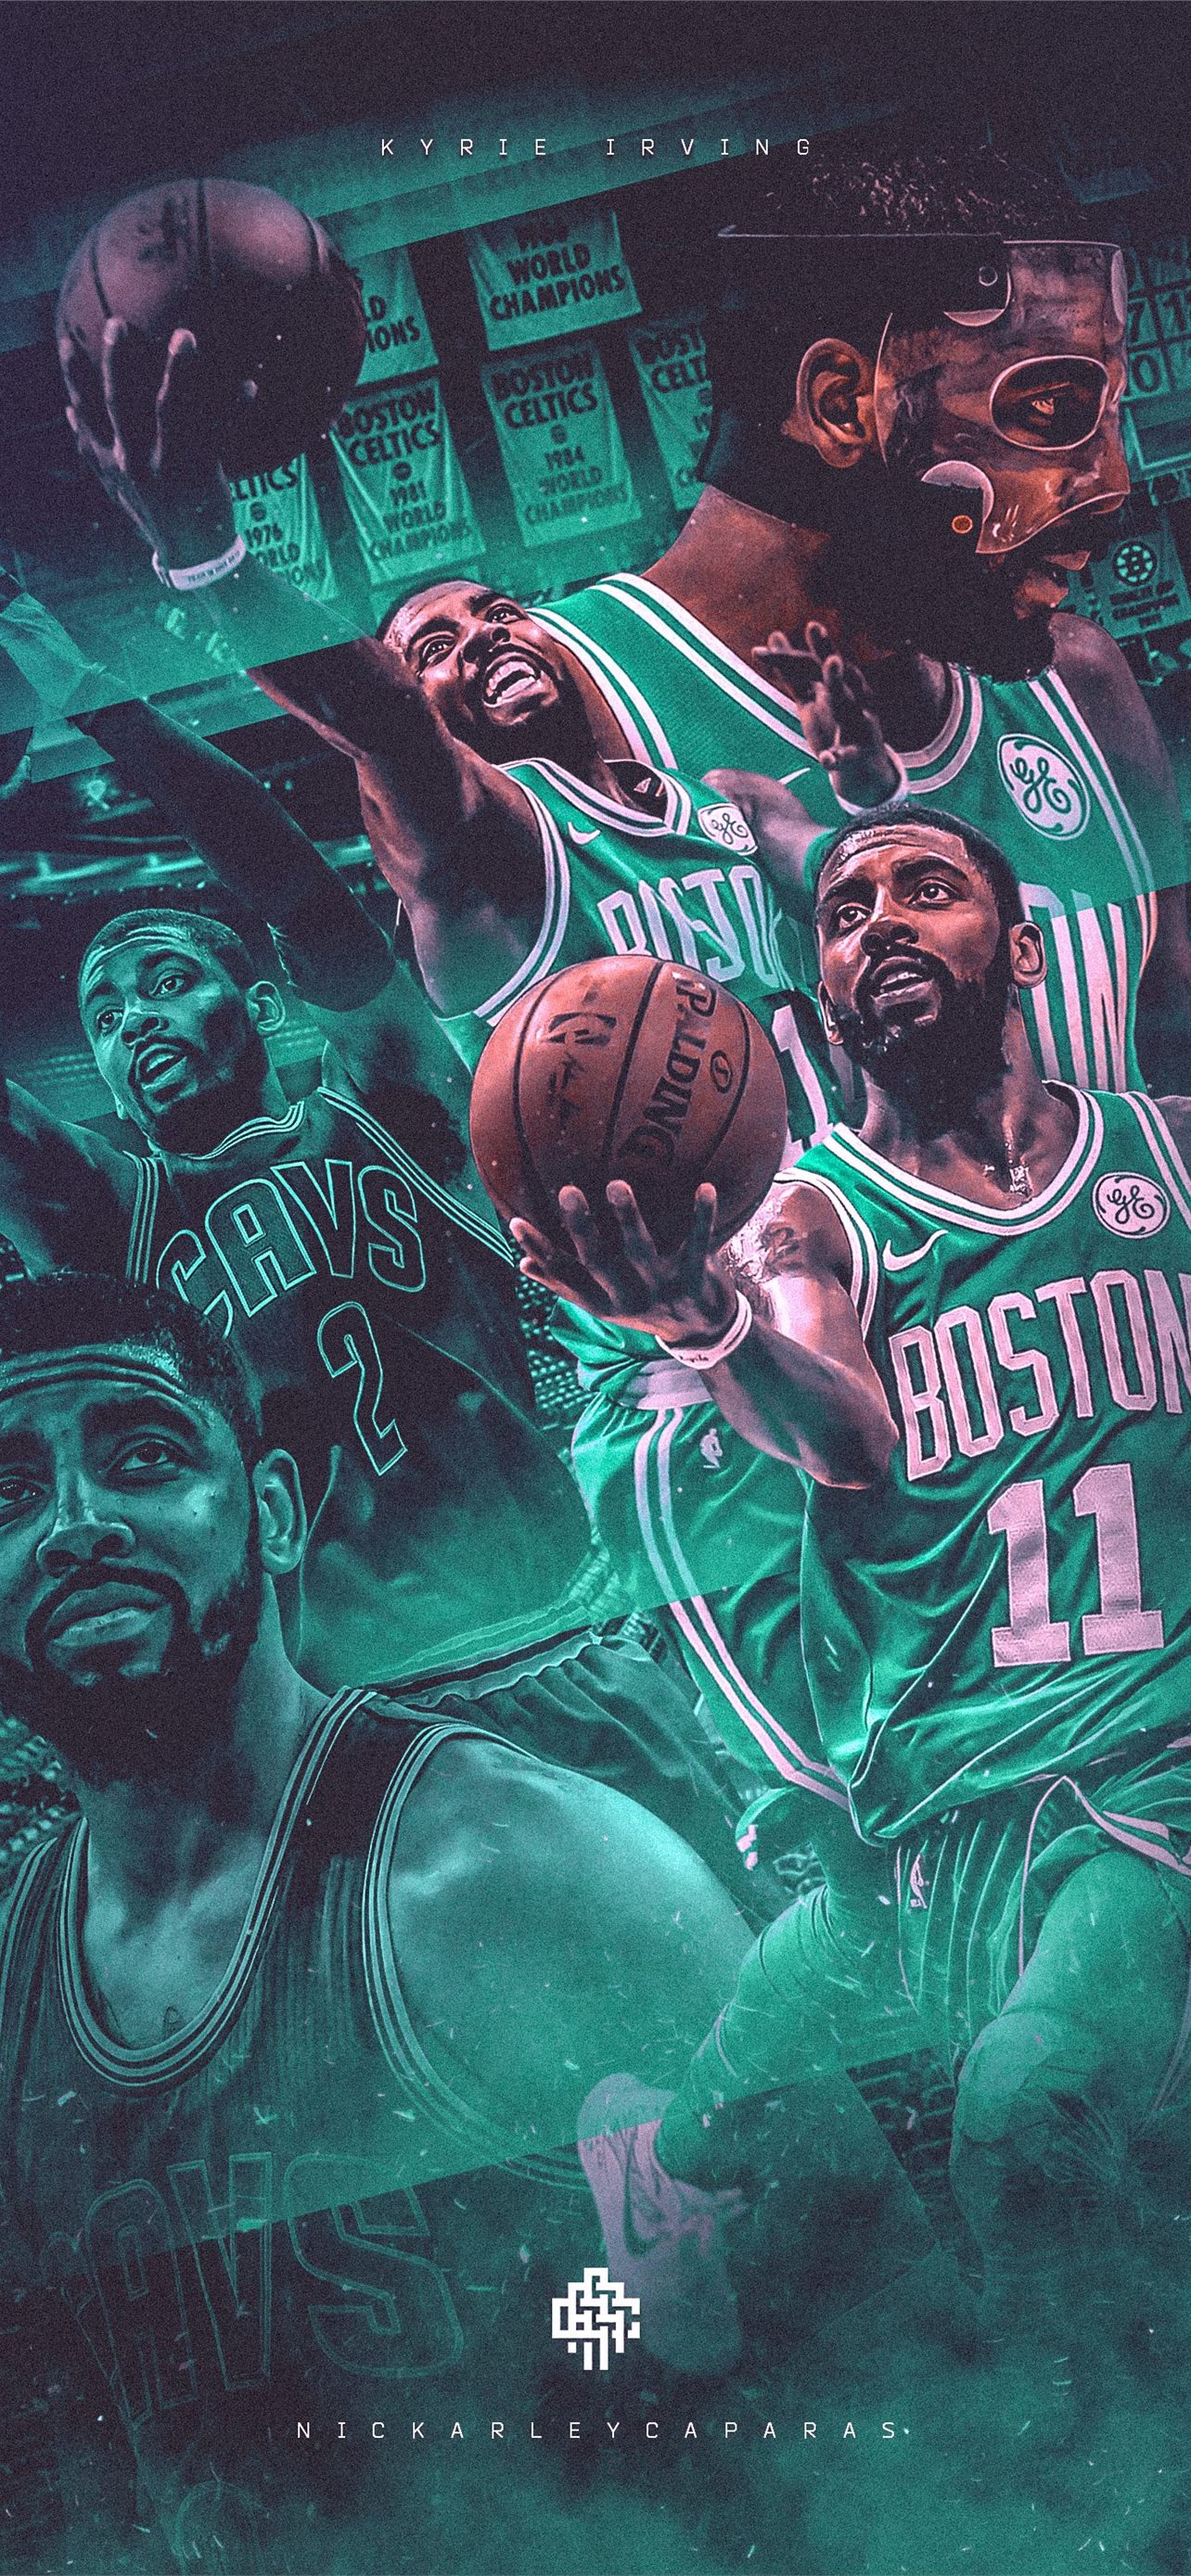 Kyrie irving 1080P, 2K, 4K, 5K HD wallpapers free download | Wallpaper Flare